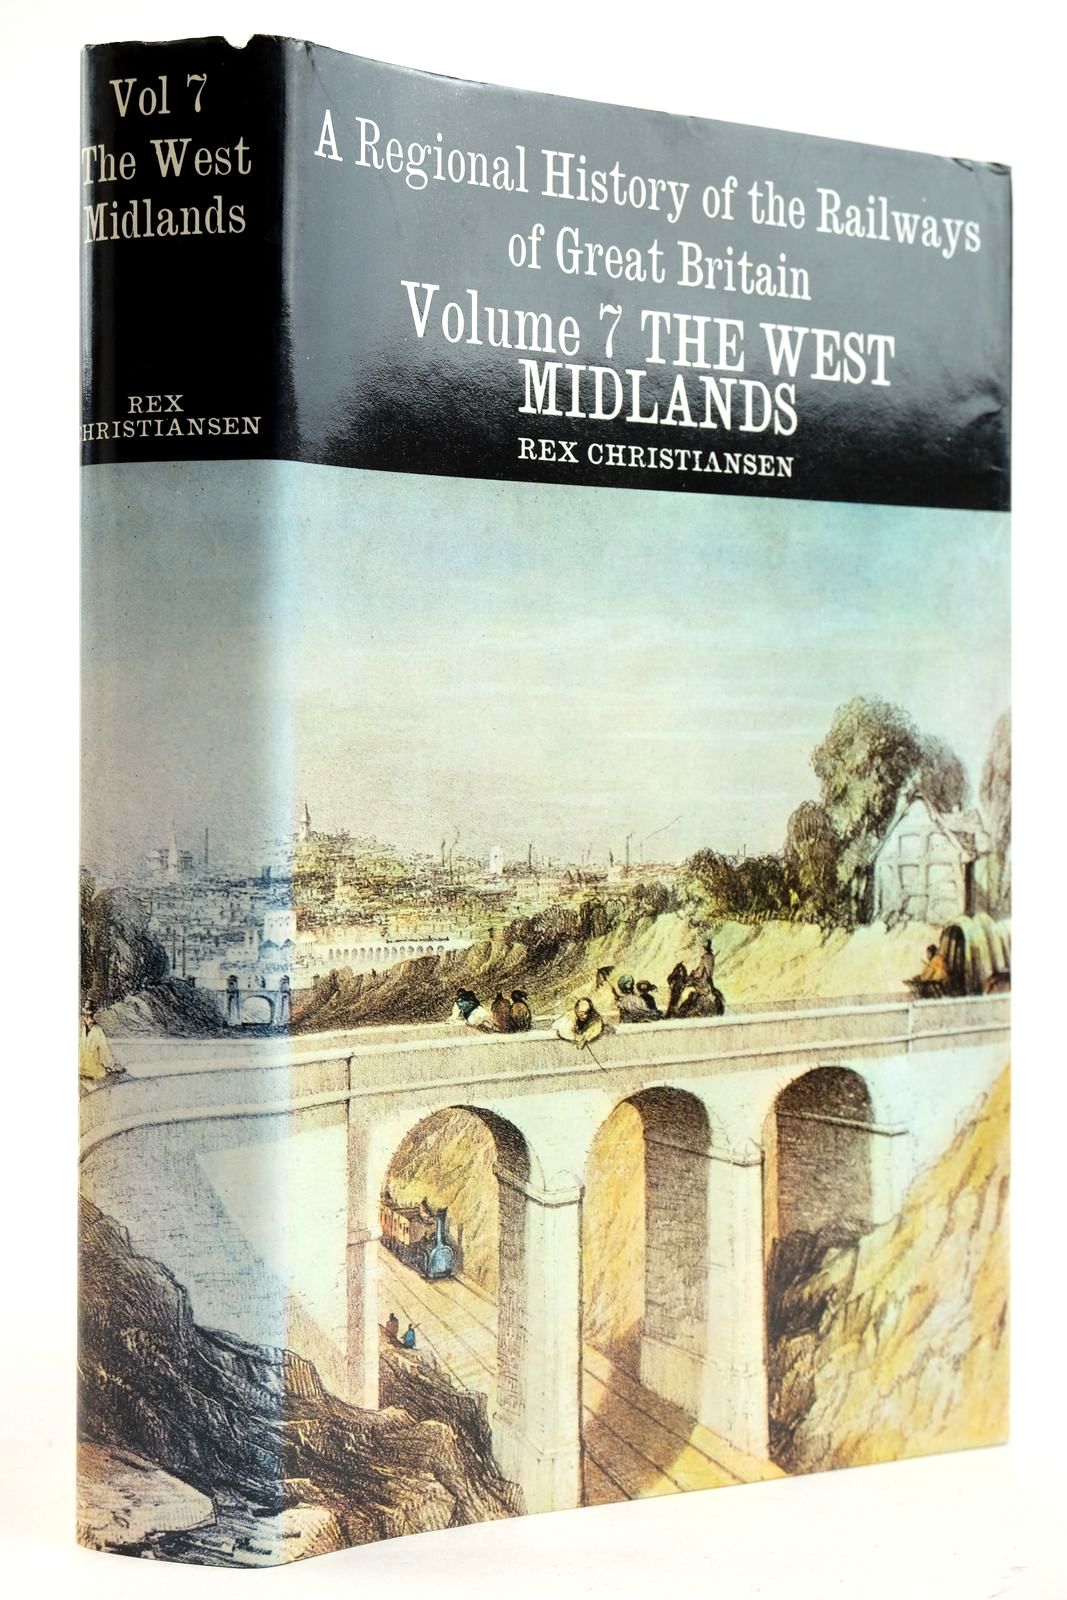 Photo of A REGIONAL HISTORY OF THE RAILWAYS OF GREAT BRITAIN VOLUME 7 THE WEST MIDLANDS written by Christiansen, Rex published by David St John Thomas, David & Charles (STOCK CODE: 2133114)  for sale by Stella & Rose's Books